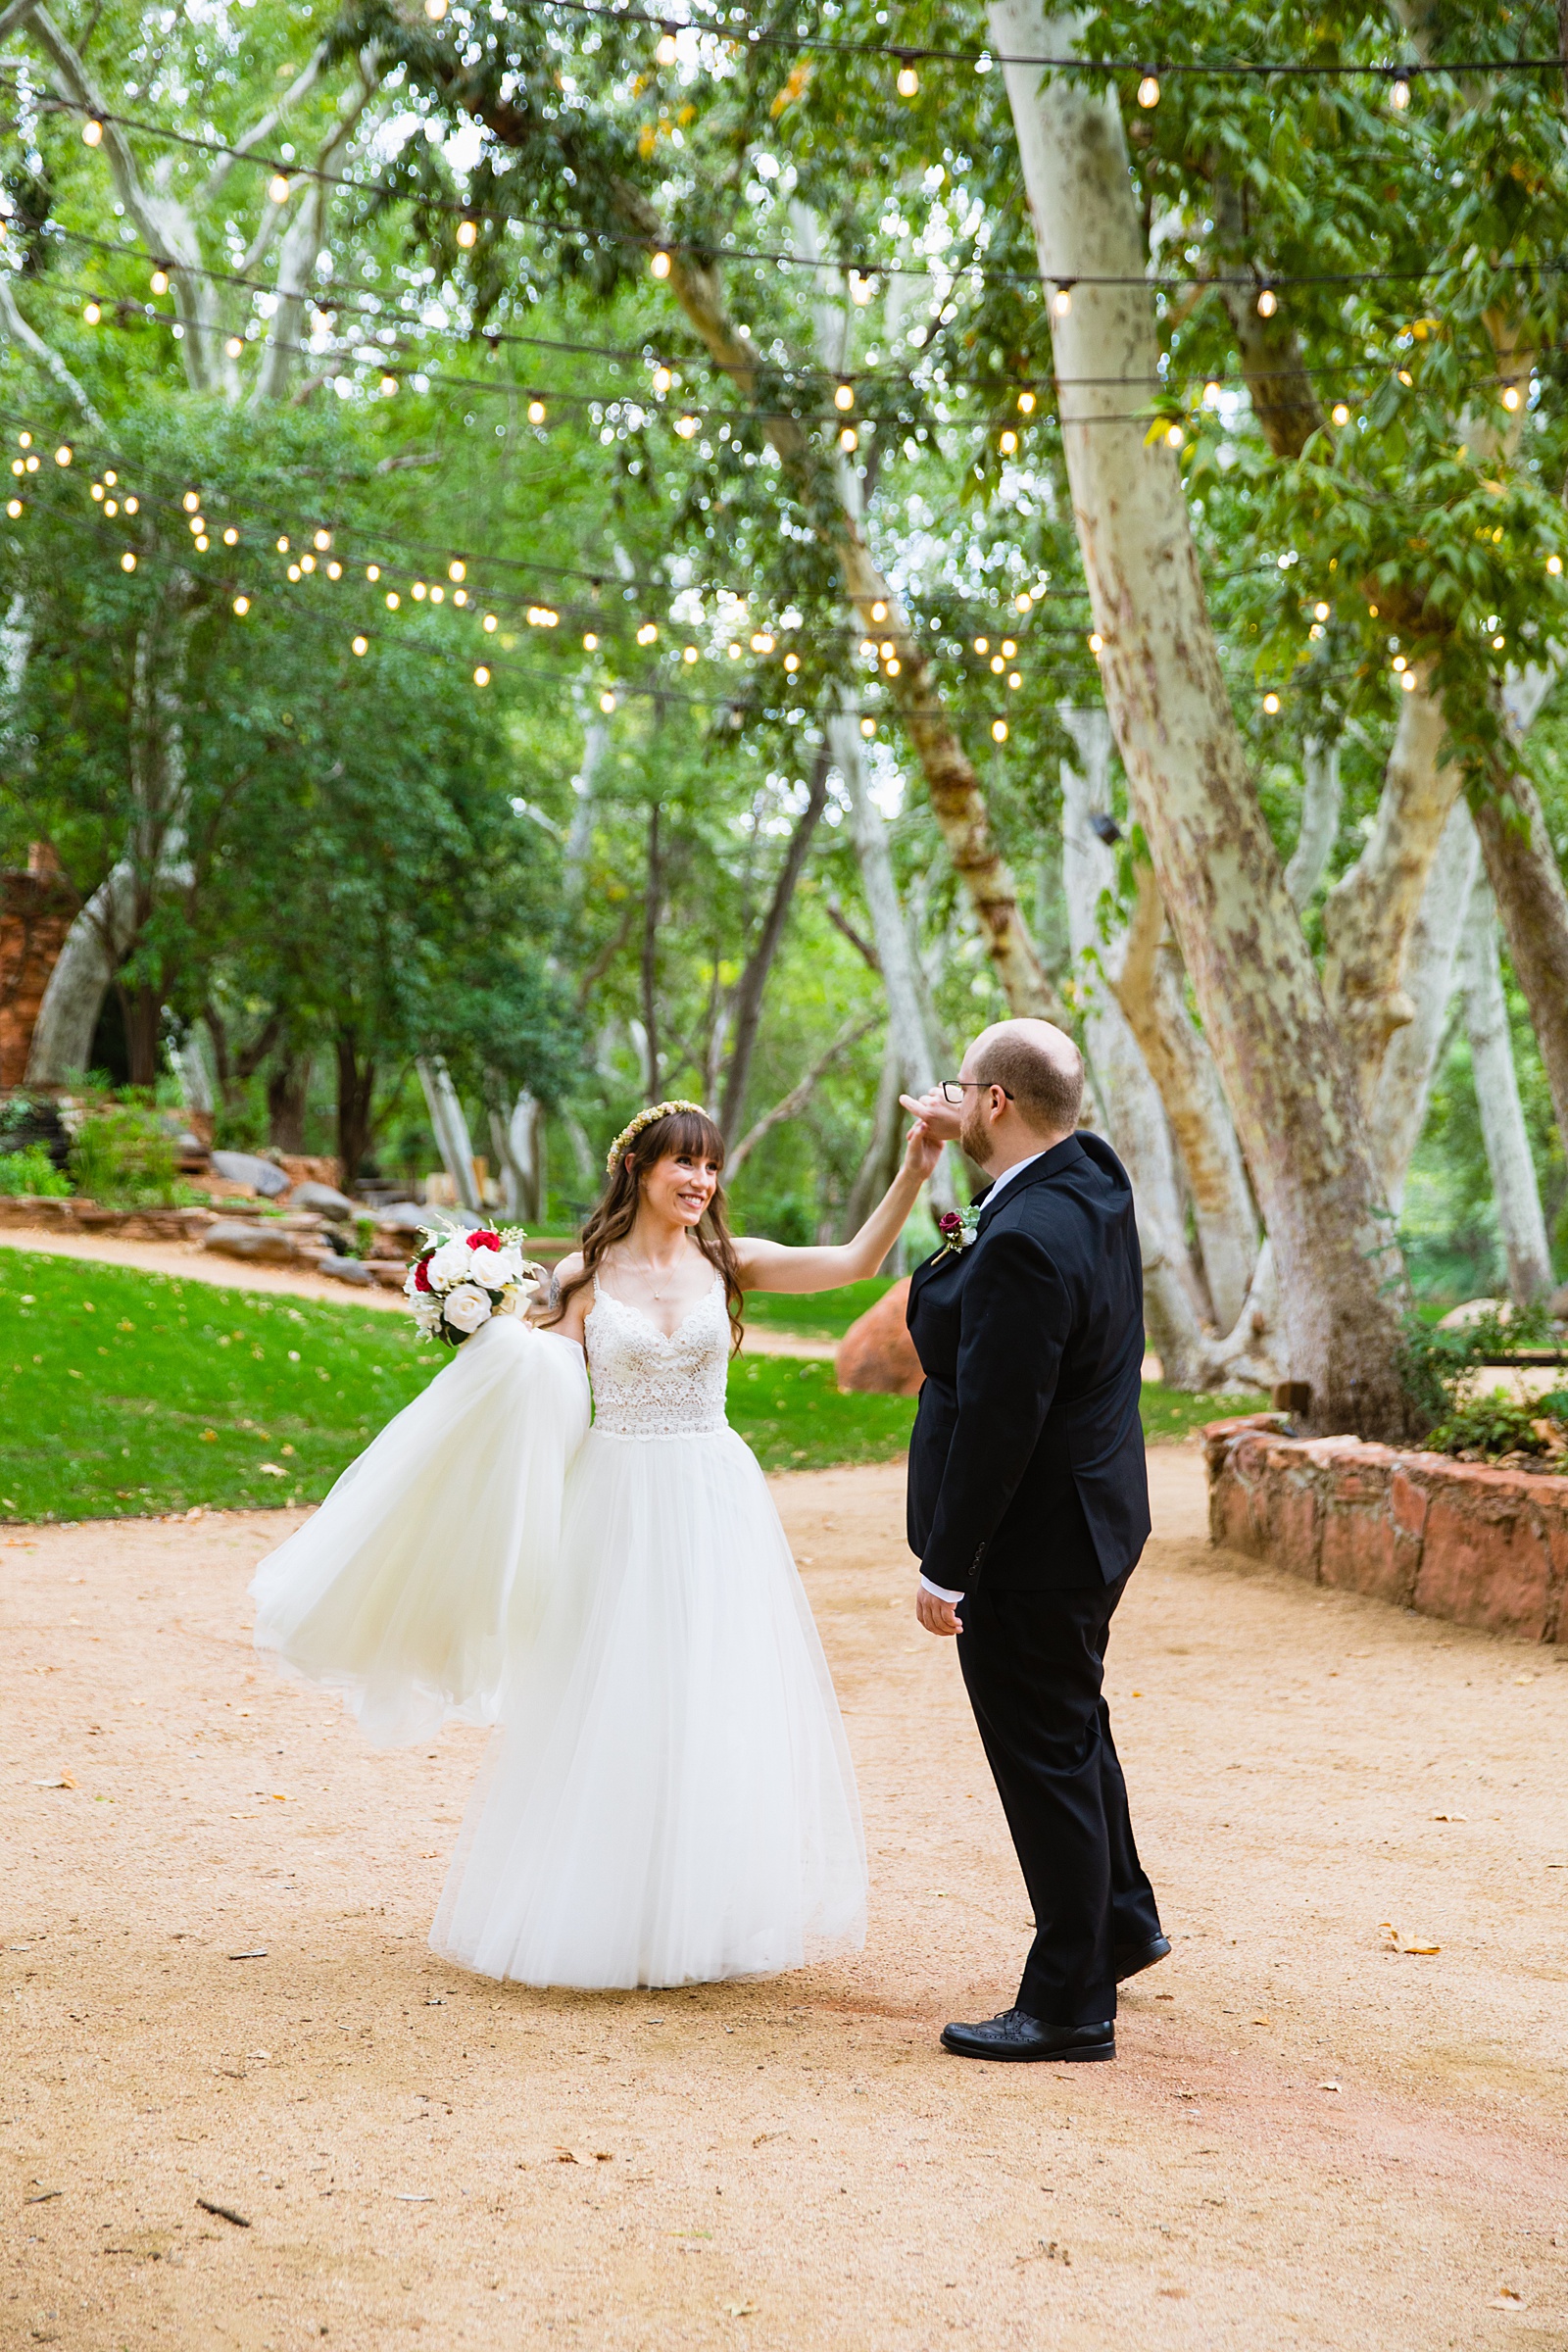 Bride and Groom dancing together during their Los Abrigados wedding by Sedona wedding photographer PMA Photography.